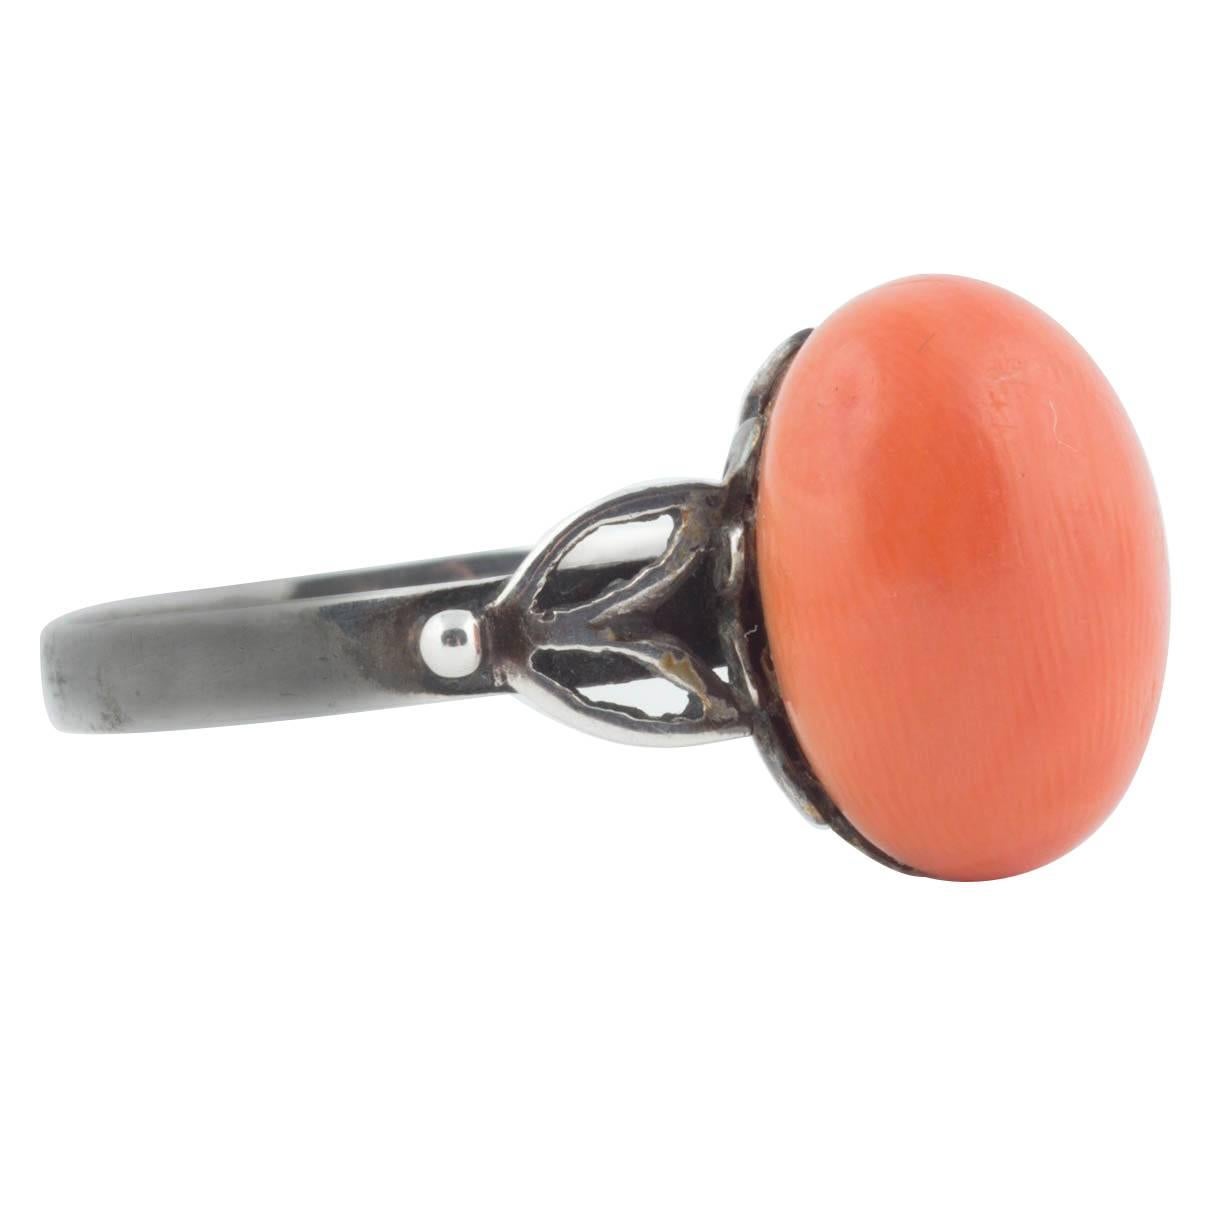 From the Romanov era, a distinctive Russian silver ring set with an oval orange coral from the Black Sea. The coral measures approximately 13 x 10 x 8 mm (l x w x h) and is of a fine quality and uniform colour. Of typical Russian design with leaf